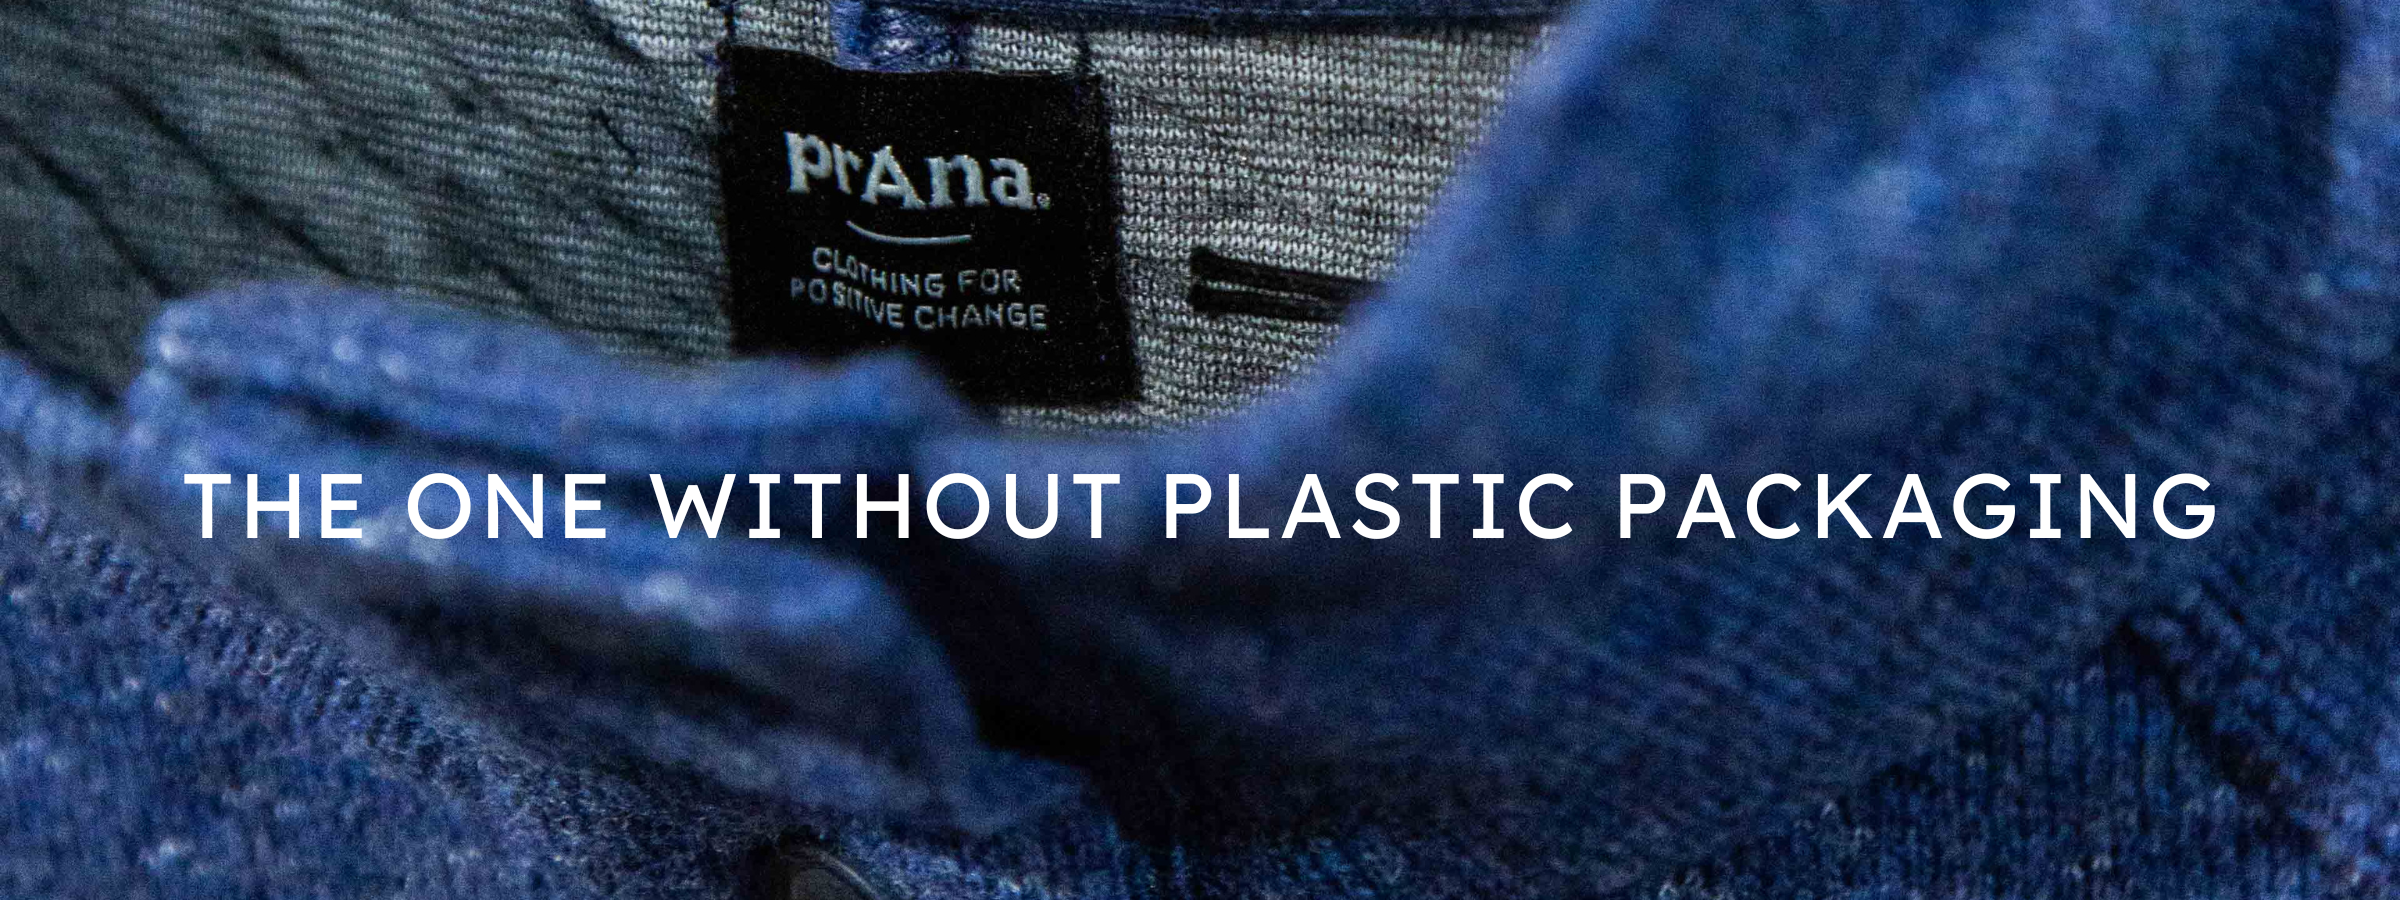 Brand Feature: prAna  The One Without Plastic Packaging - River & Trail  Outdoor Company